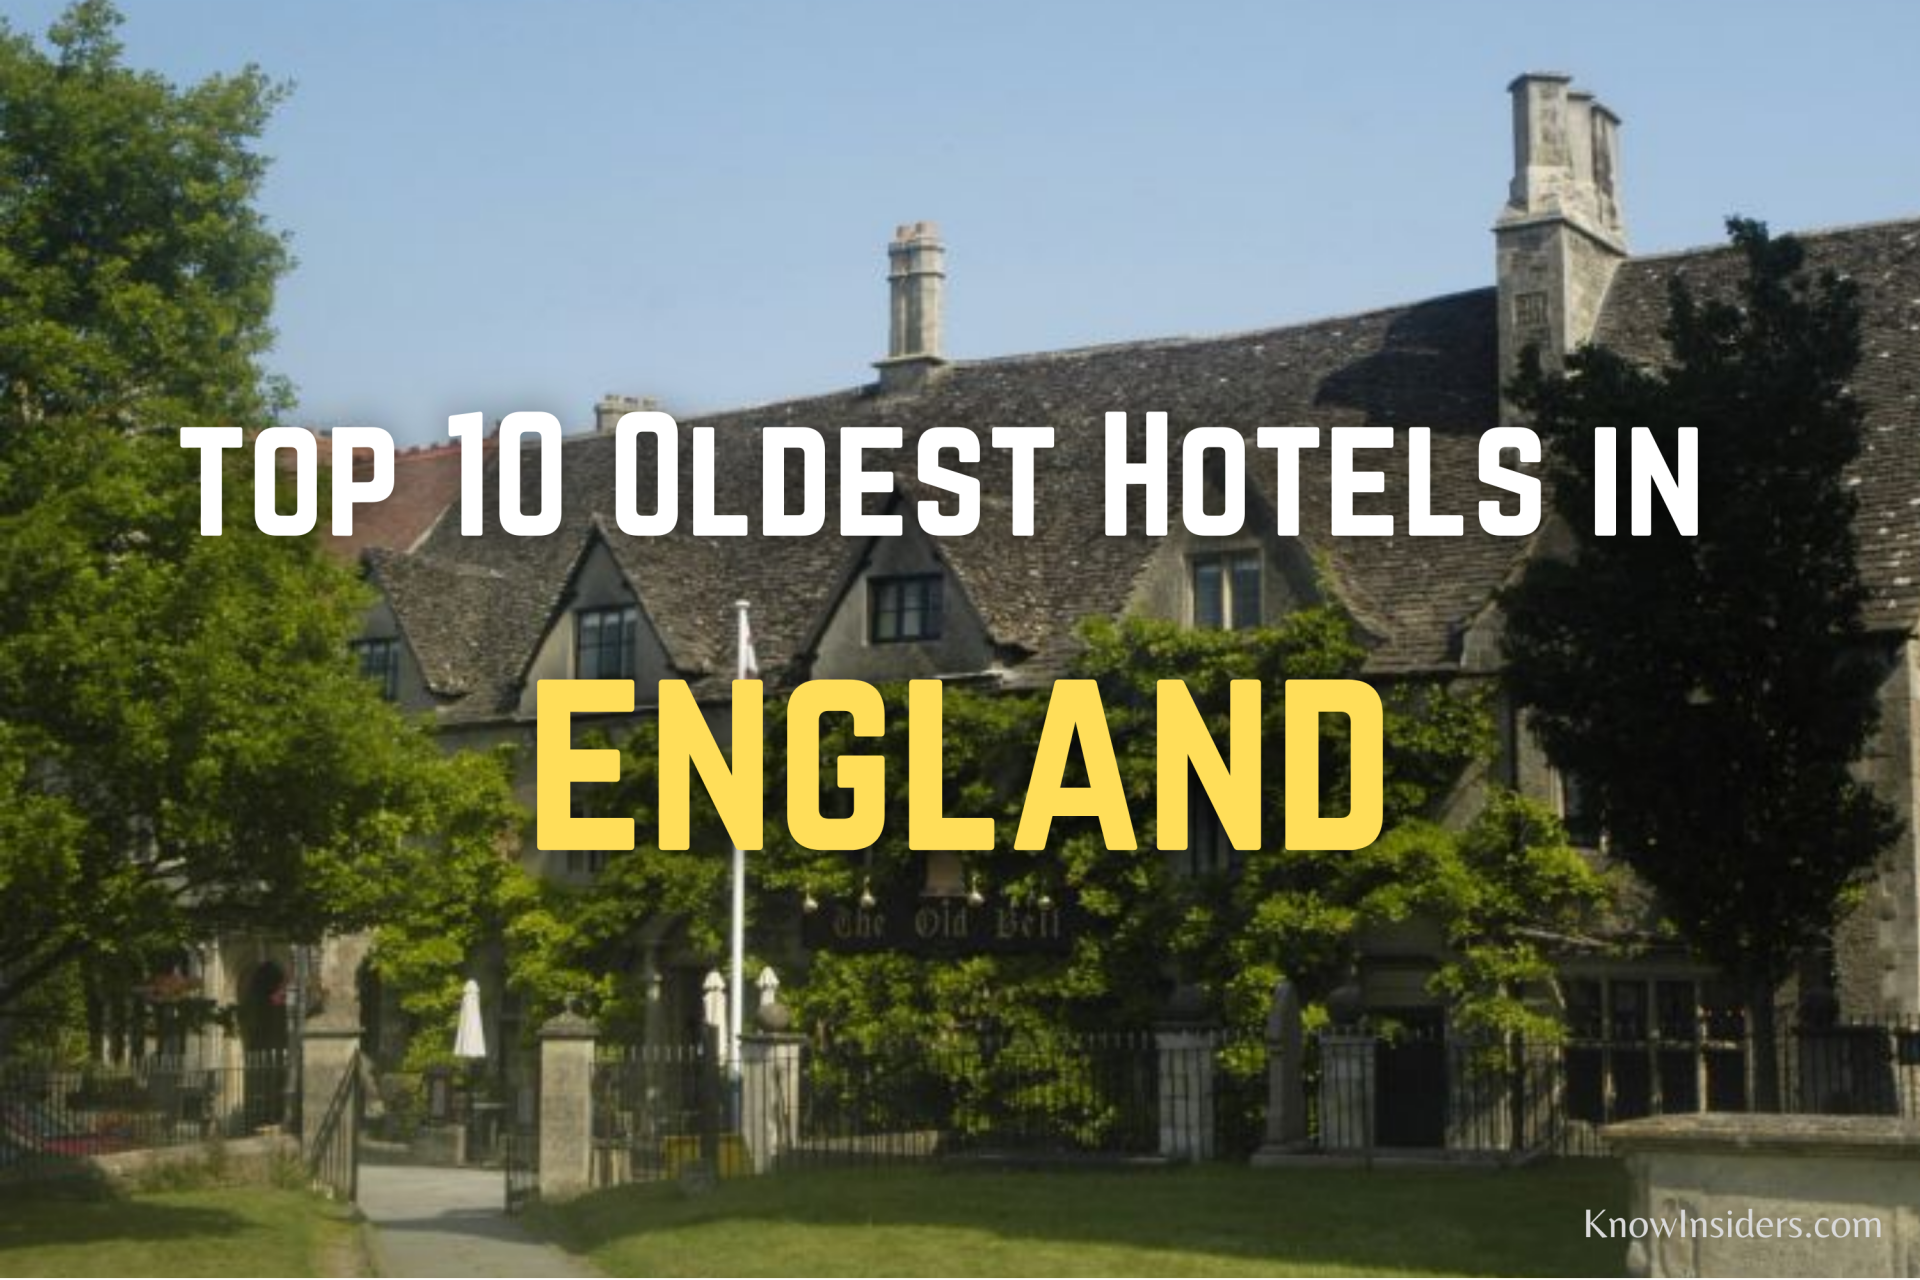 Top 10 Oldest Hotels in England - The First Hotels